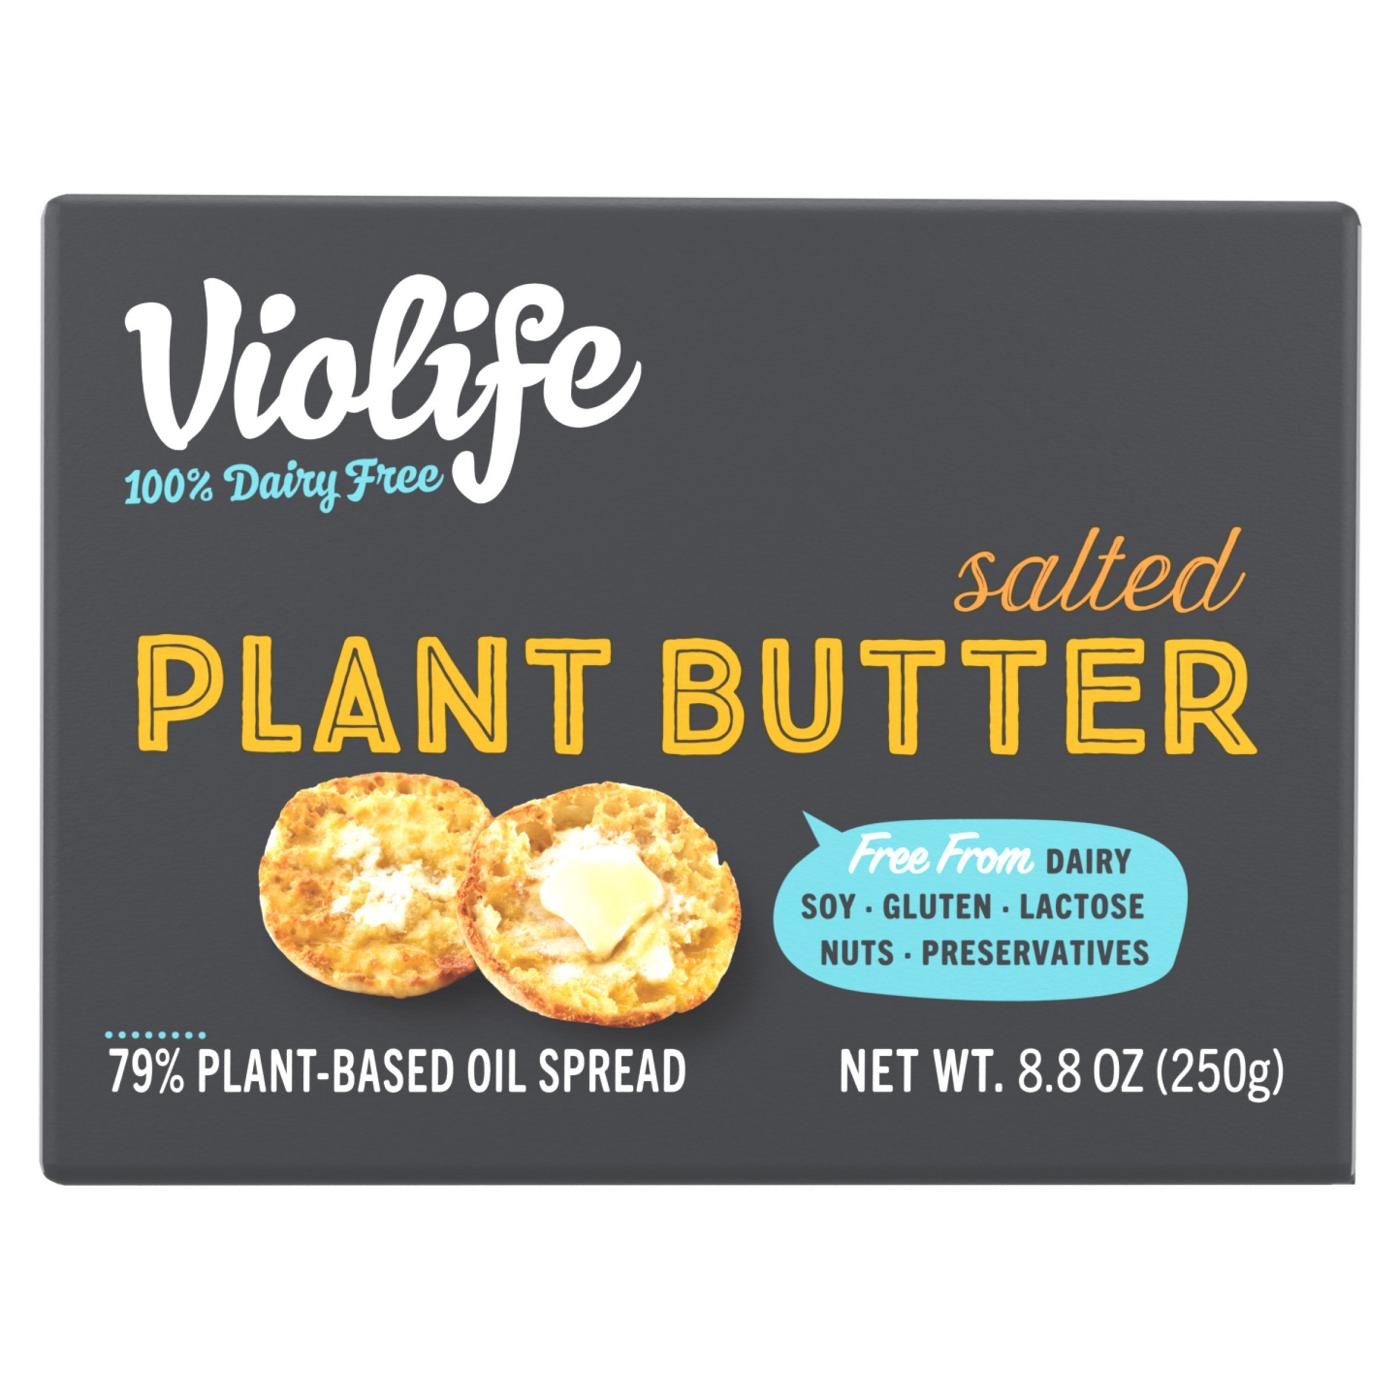 Violife Plant Butter Salted Dairy-Free Vegan; image 1 of 10